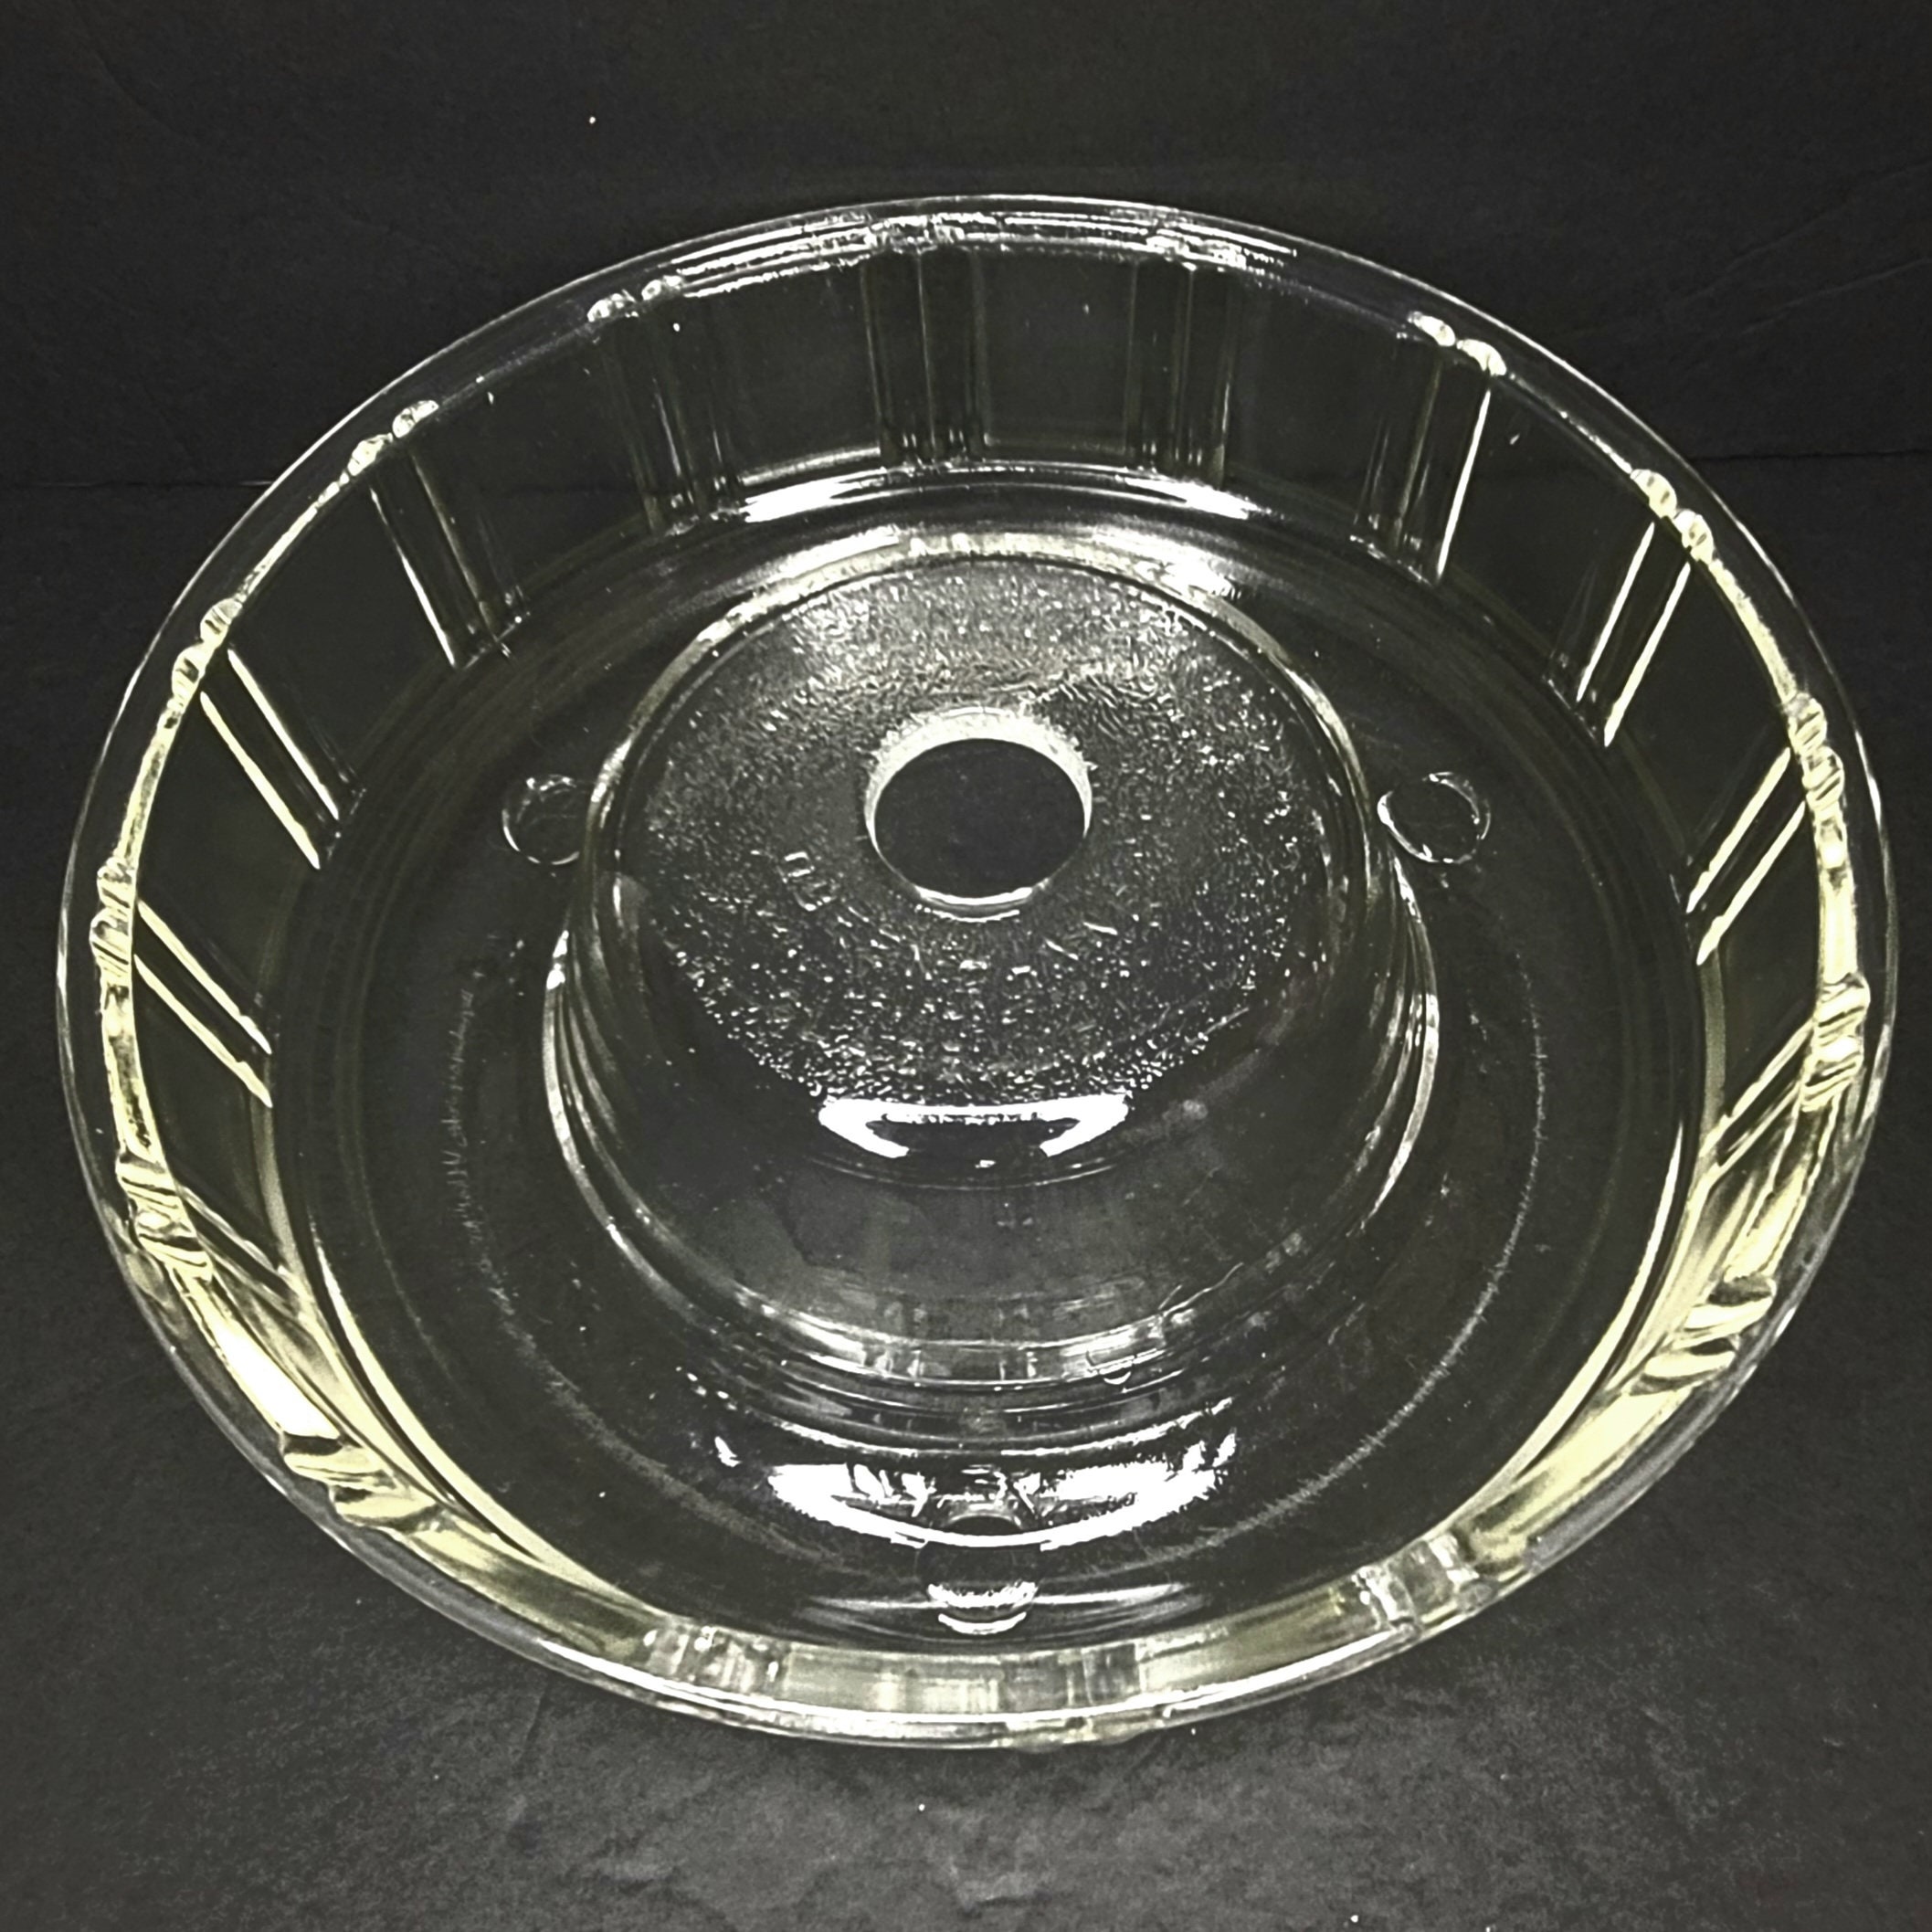 Vintage Queen Anne Glasbake Clear Glass Bundt Cake Pan Jell-o Ice Ring Mold  9”